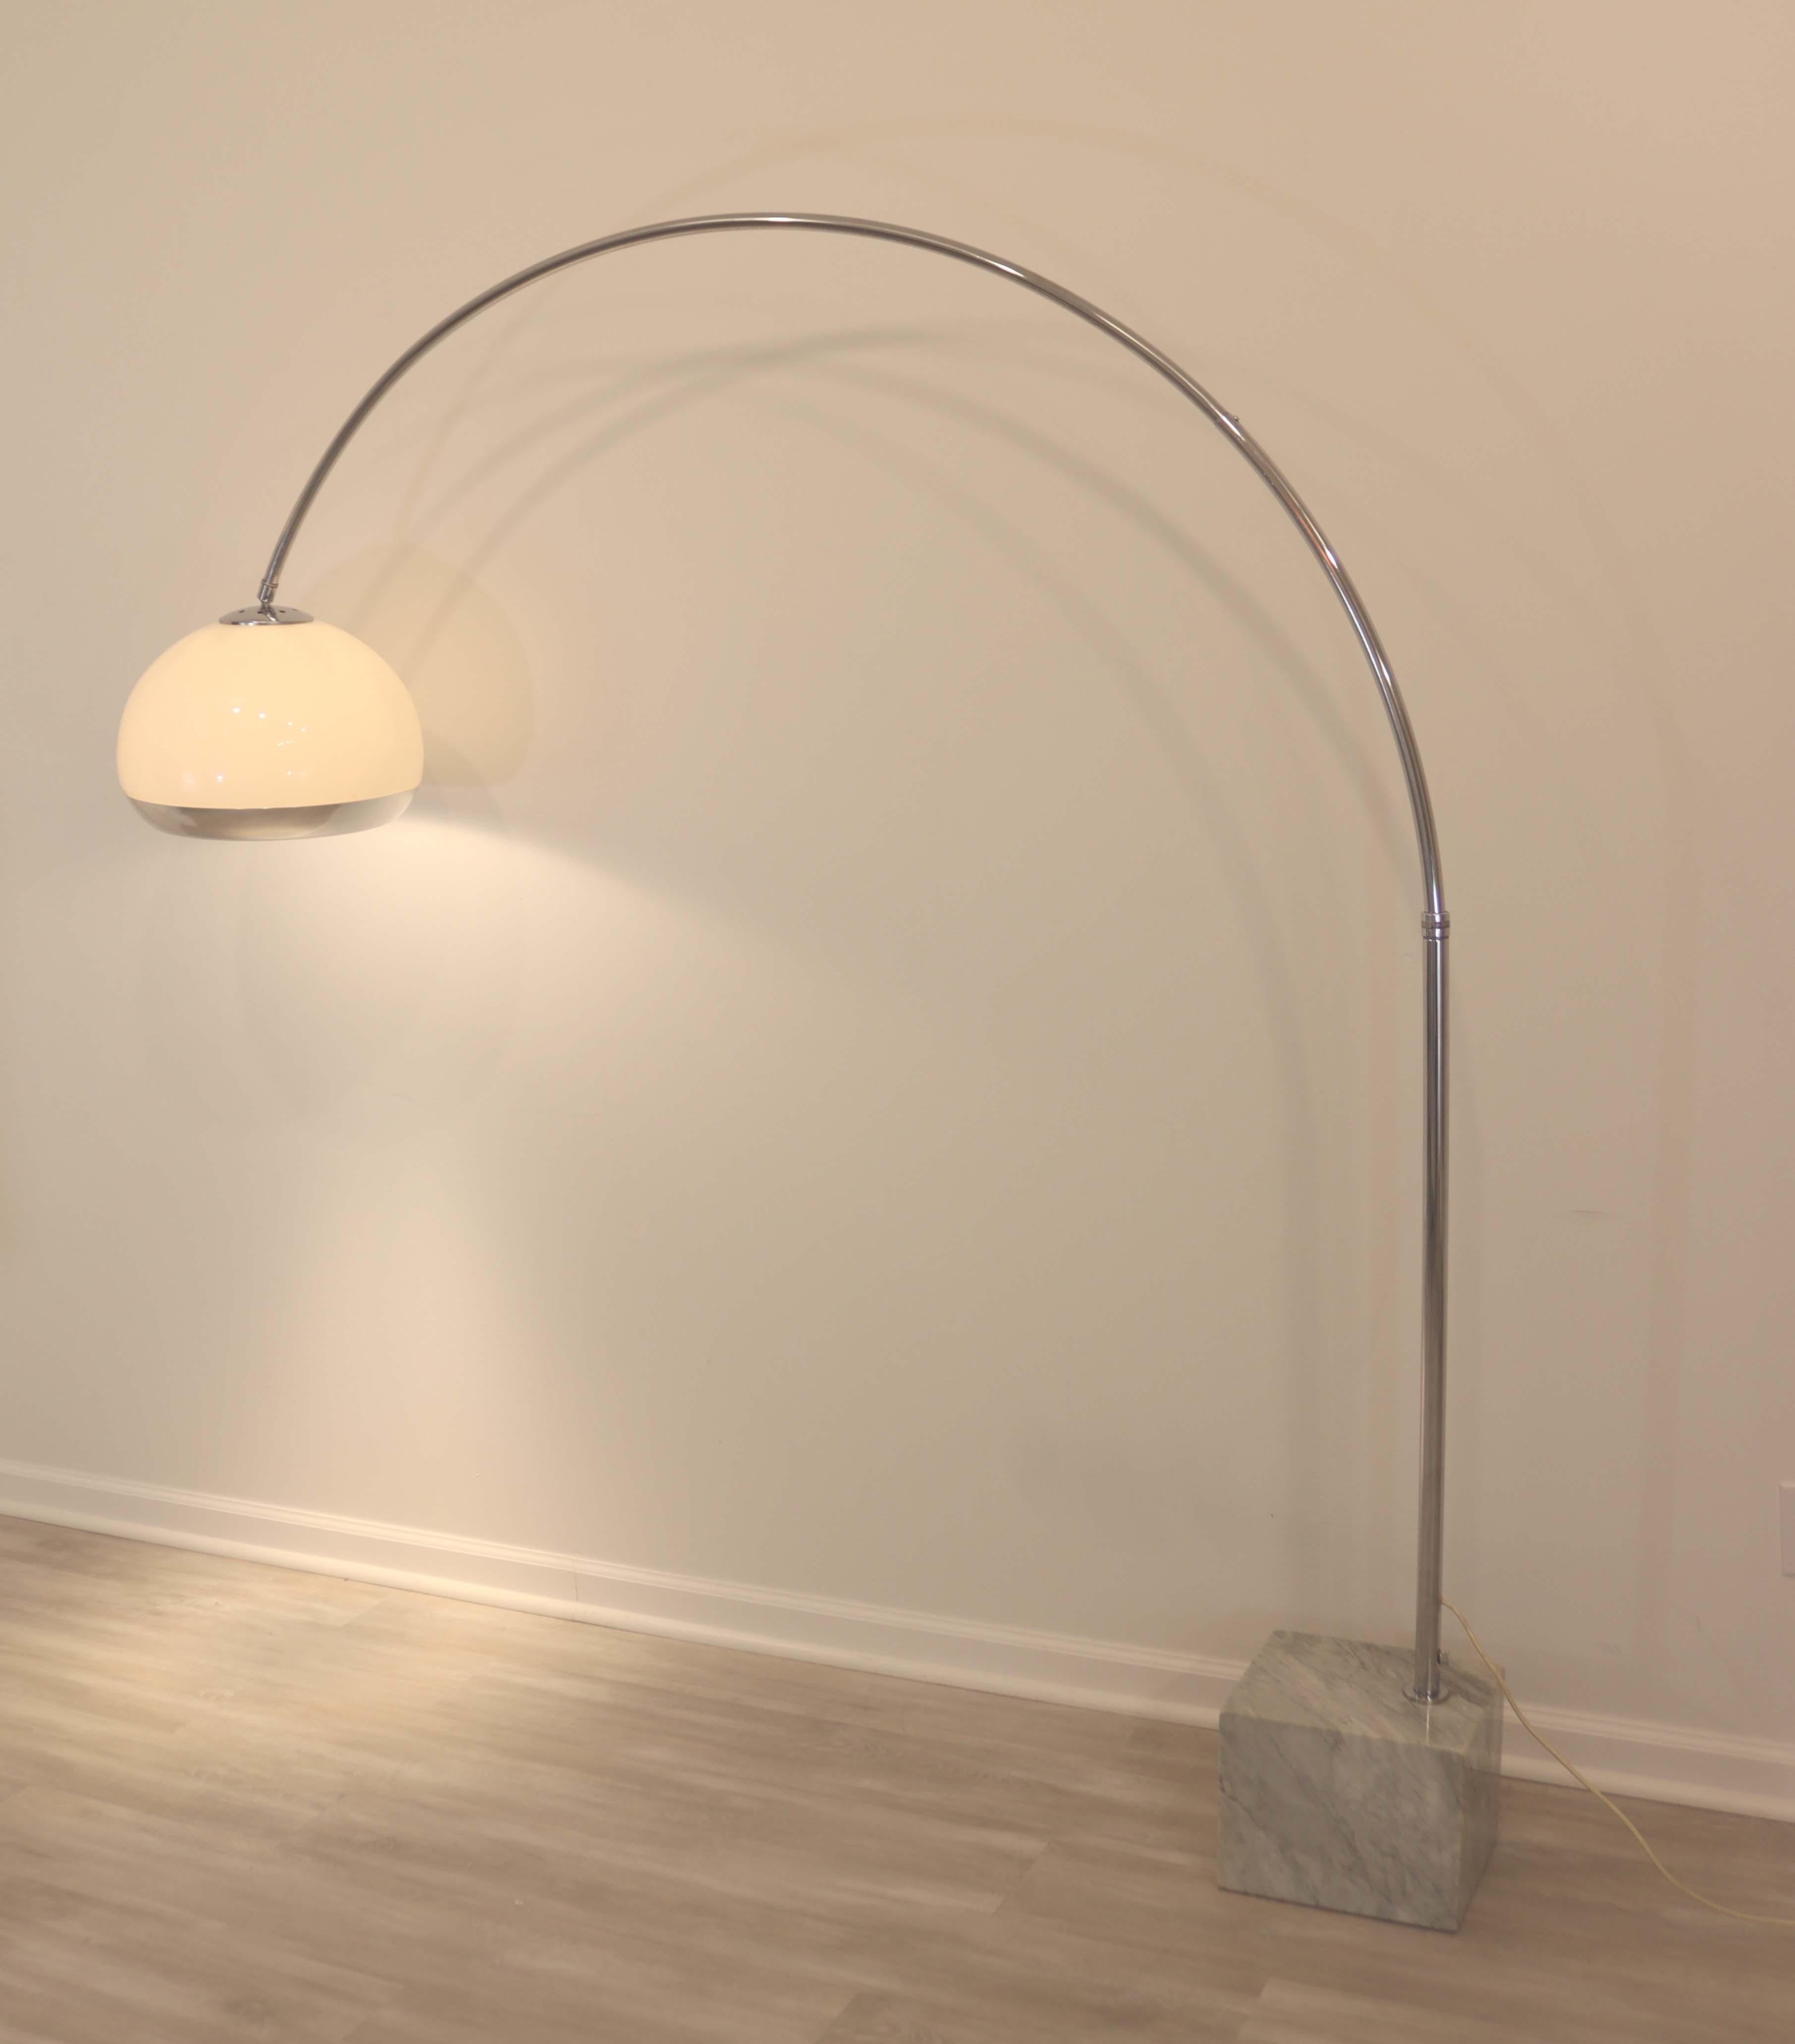 This mid century Italian Arc floor lamp designed by Harvey Guzzini for the Laurel Light Company circa the 1970's features a tubular chrome arc, an acrylic, aluminum globe shade and counter weighted with a Carrara Marble base. The shade requires 2